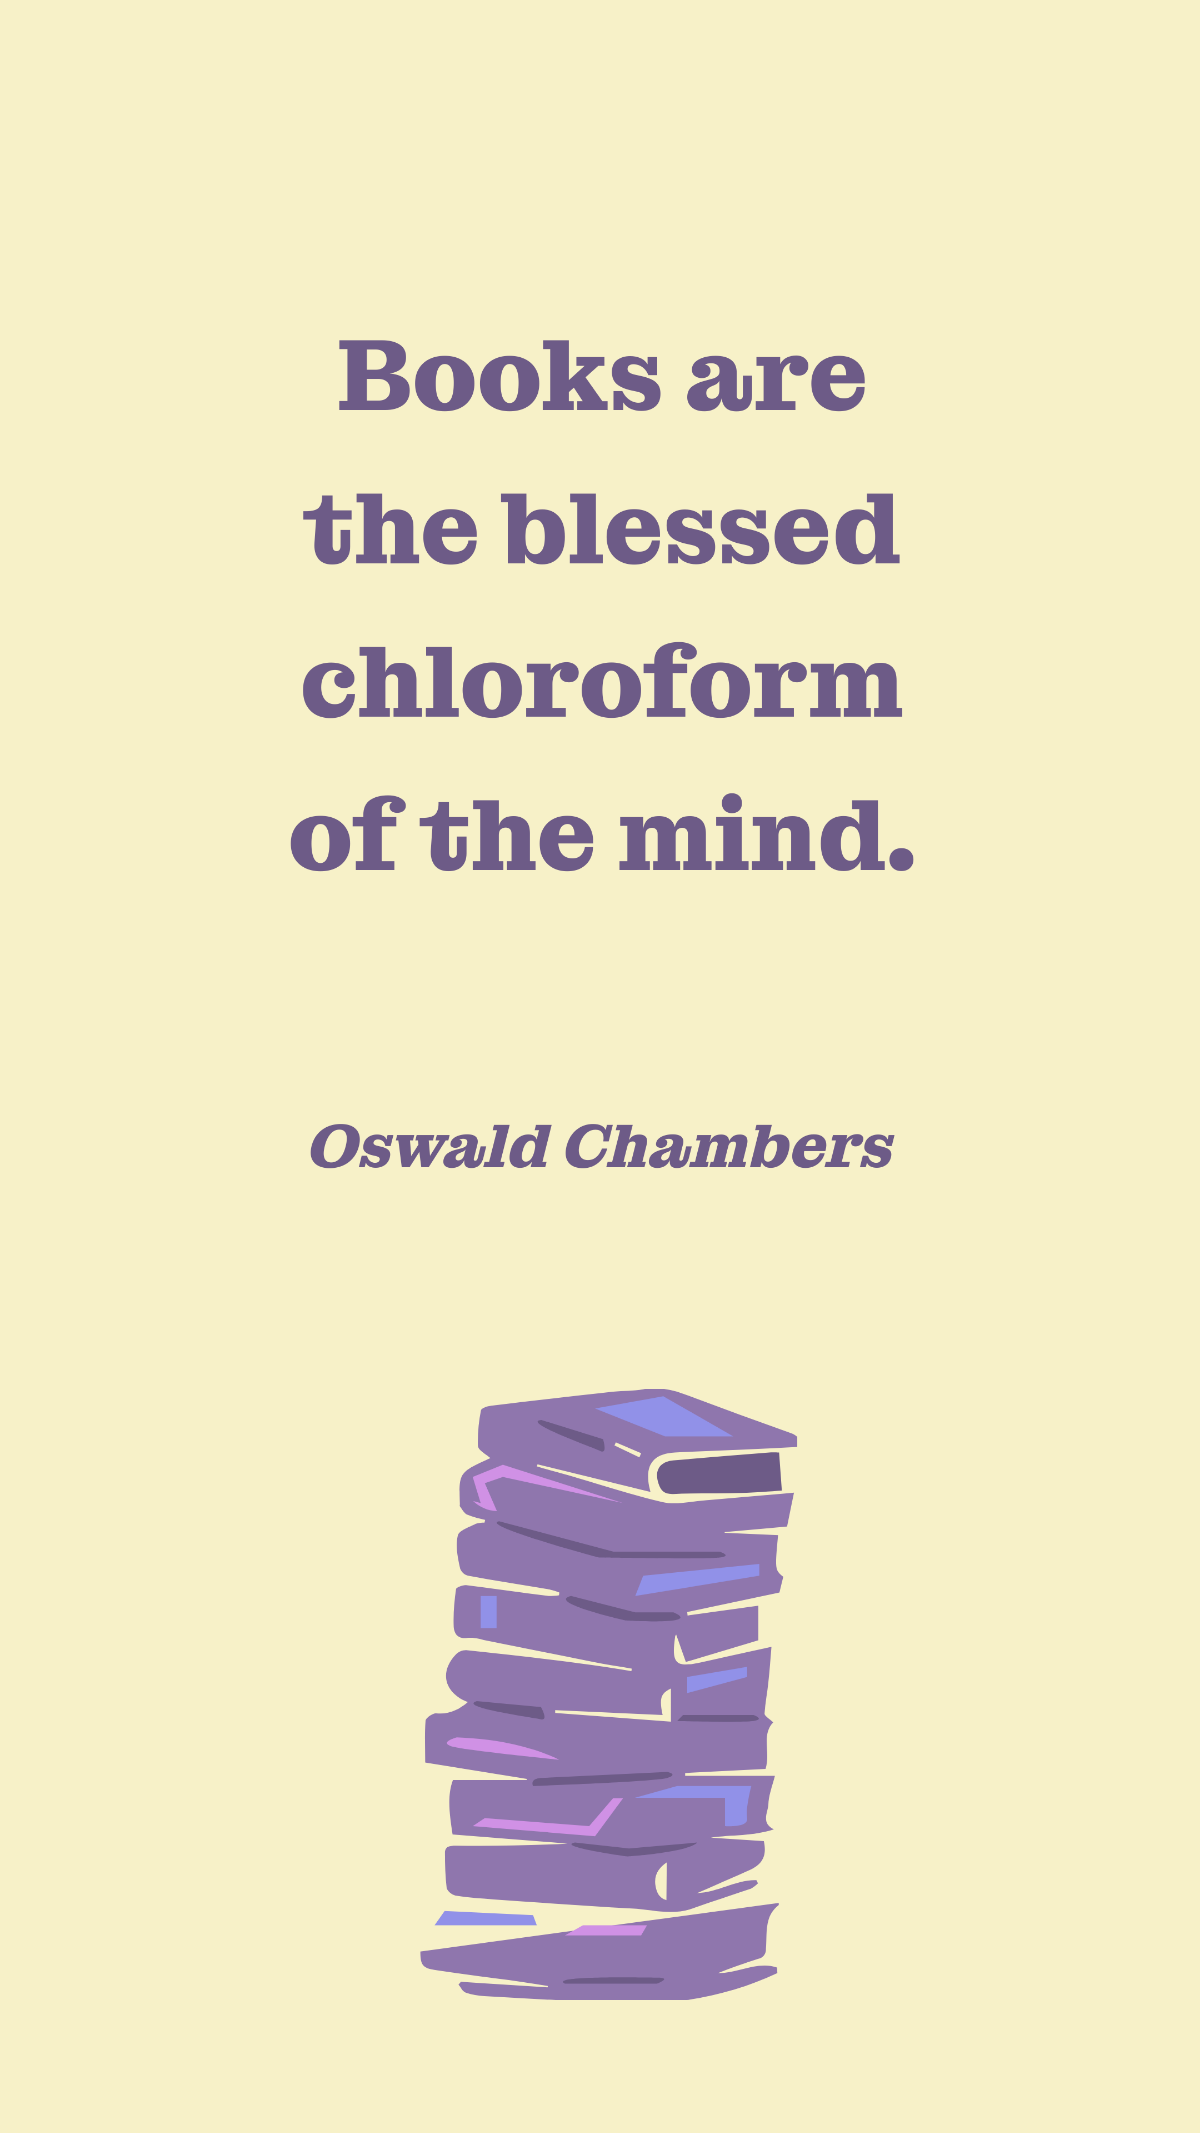 Free Oswald Chambers - Books are the blessed chloroform of the mind. Template